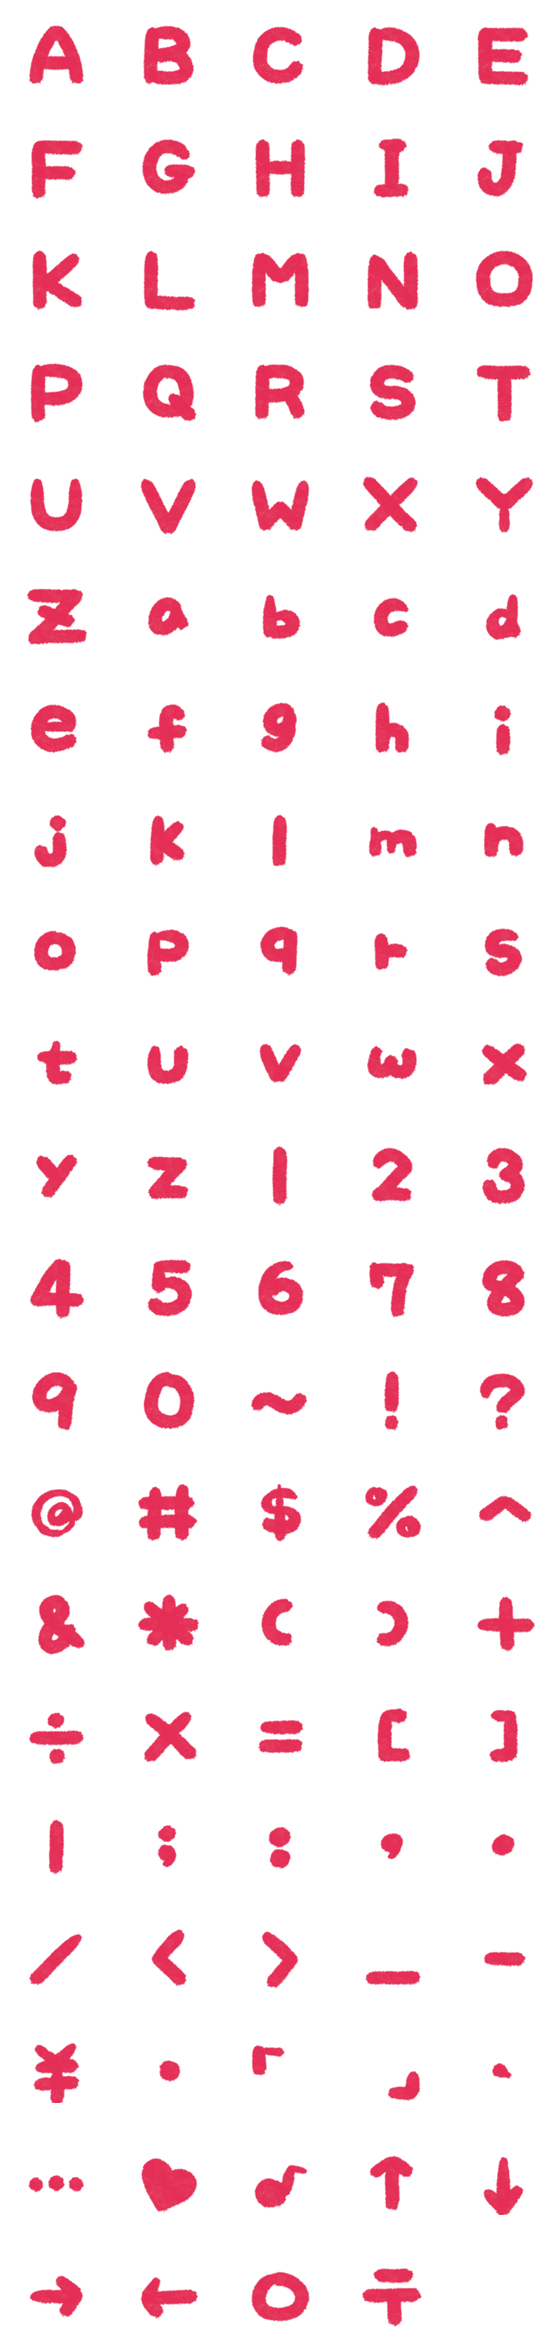 [LINE絵文字]ZENON RUBY Letter number symbols2の画像一覧